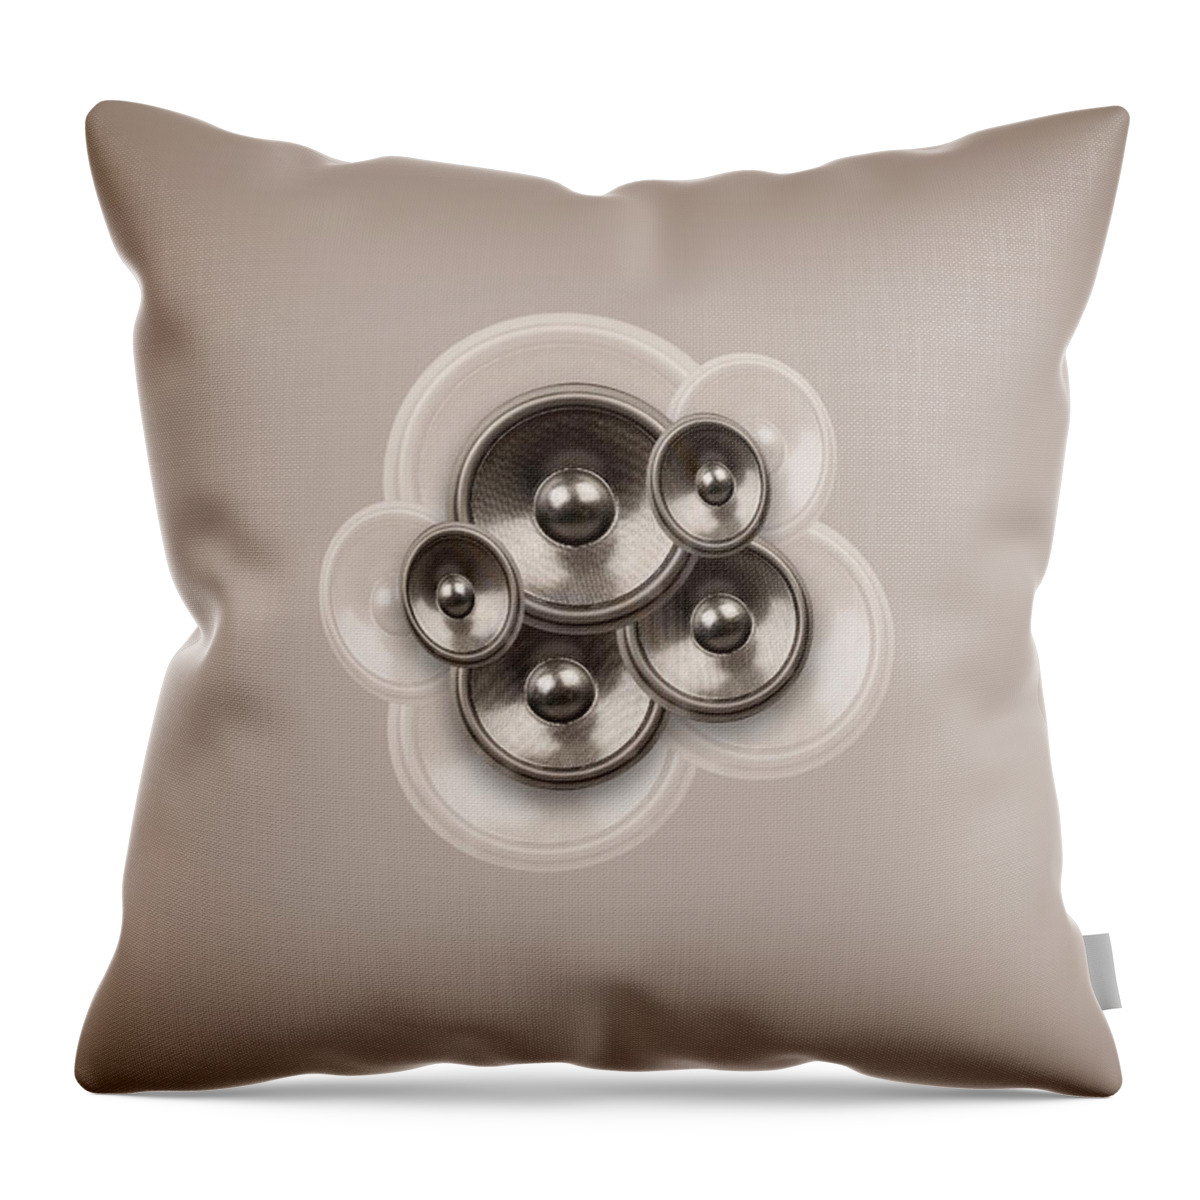 Background Throw Pillow featuring the digital art Audio Retro 3 by Steve Ball